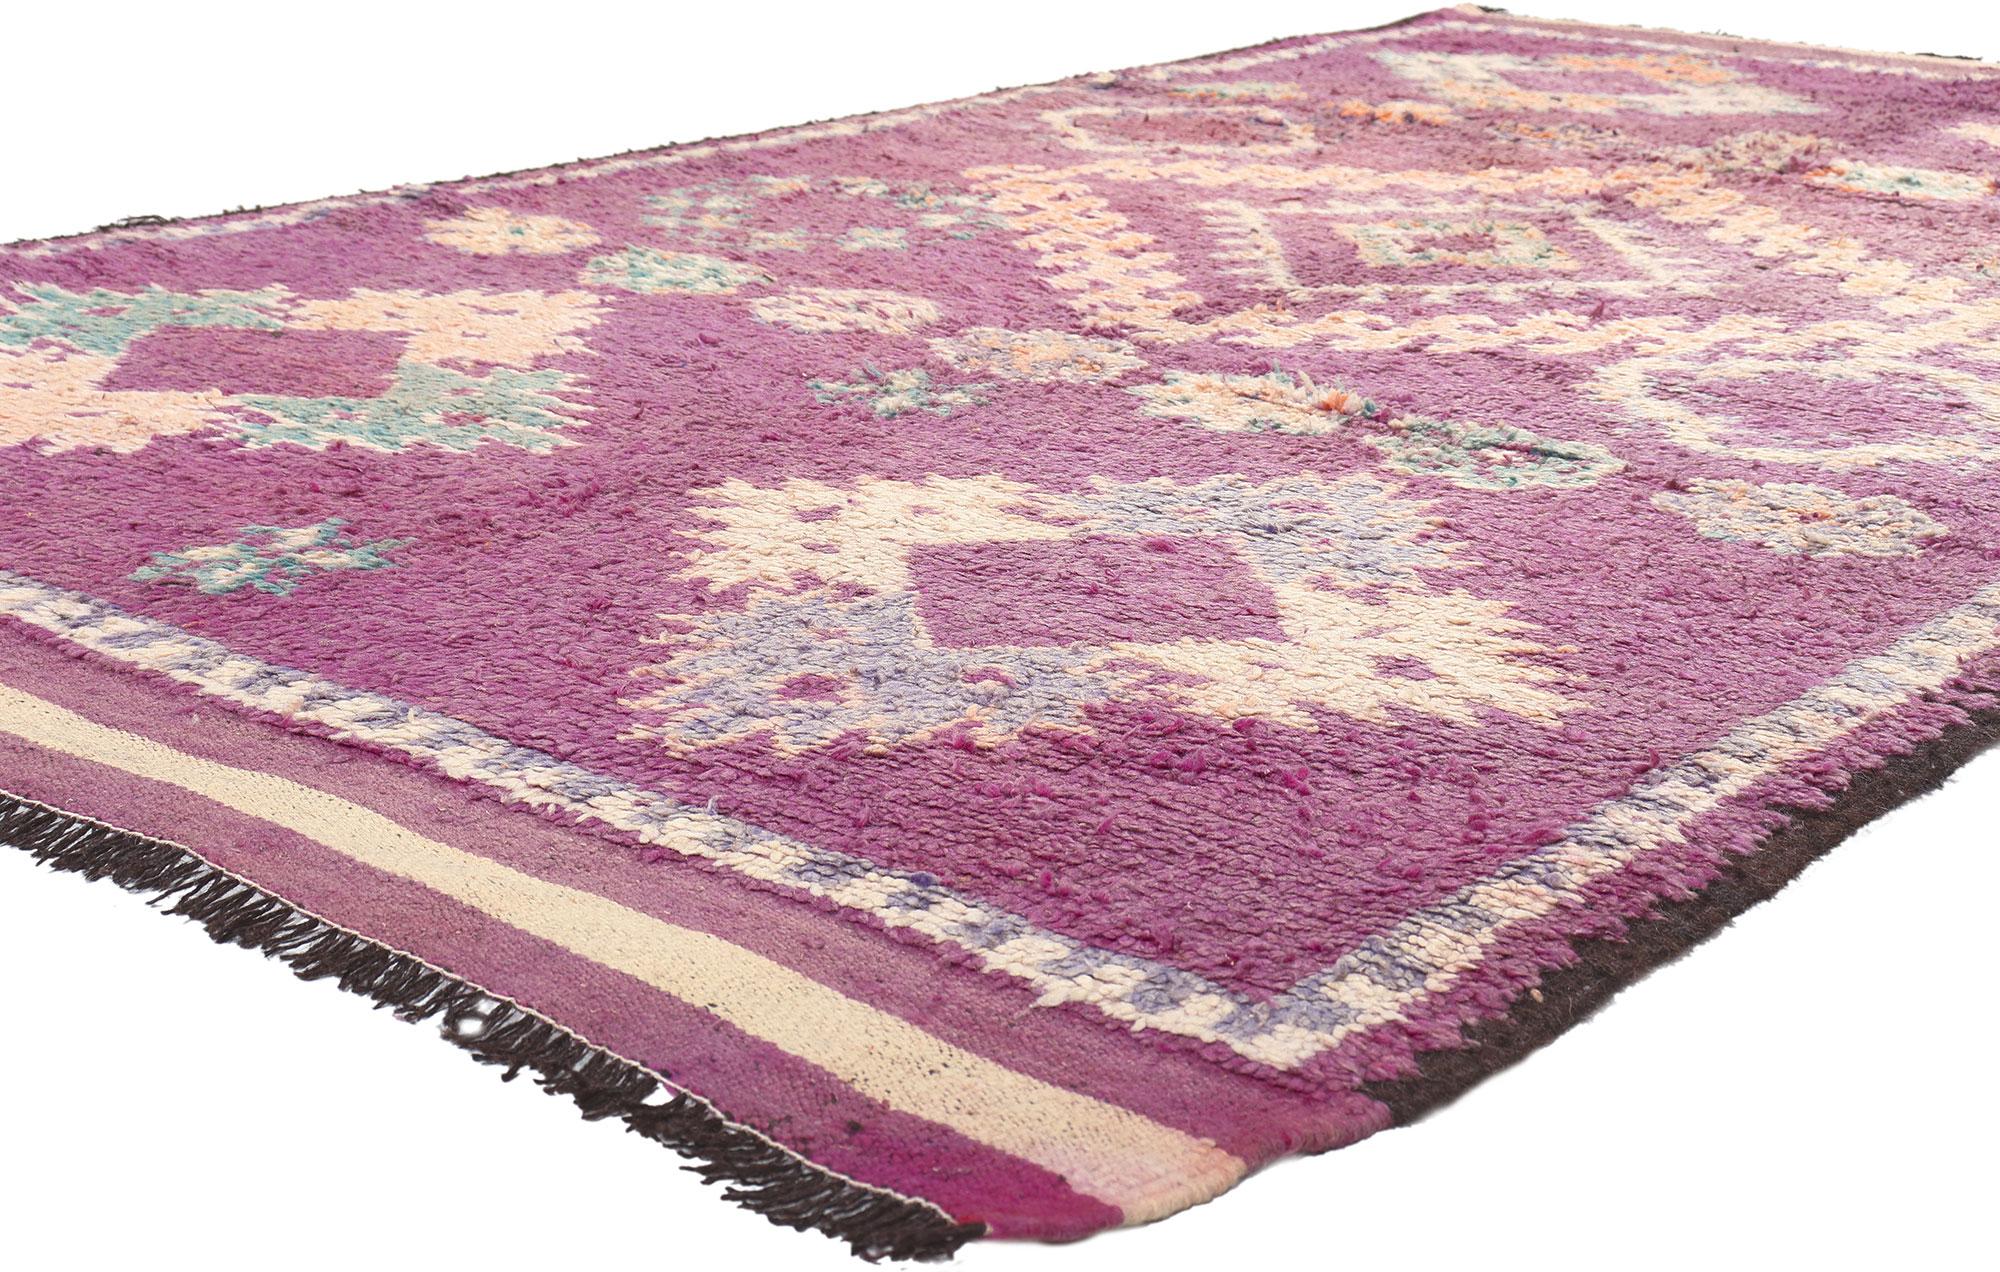 20983 Vintage Purple Talsint Moroccan Rug, 05'10 x 10'11. From the heart of the Figuig province, home to the Ait Bou Ichaouen tribe, emerges the Talsint Moroccan rug, named after the rural town of Talsint in Northeastern Morocco, celebrated for its